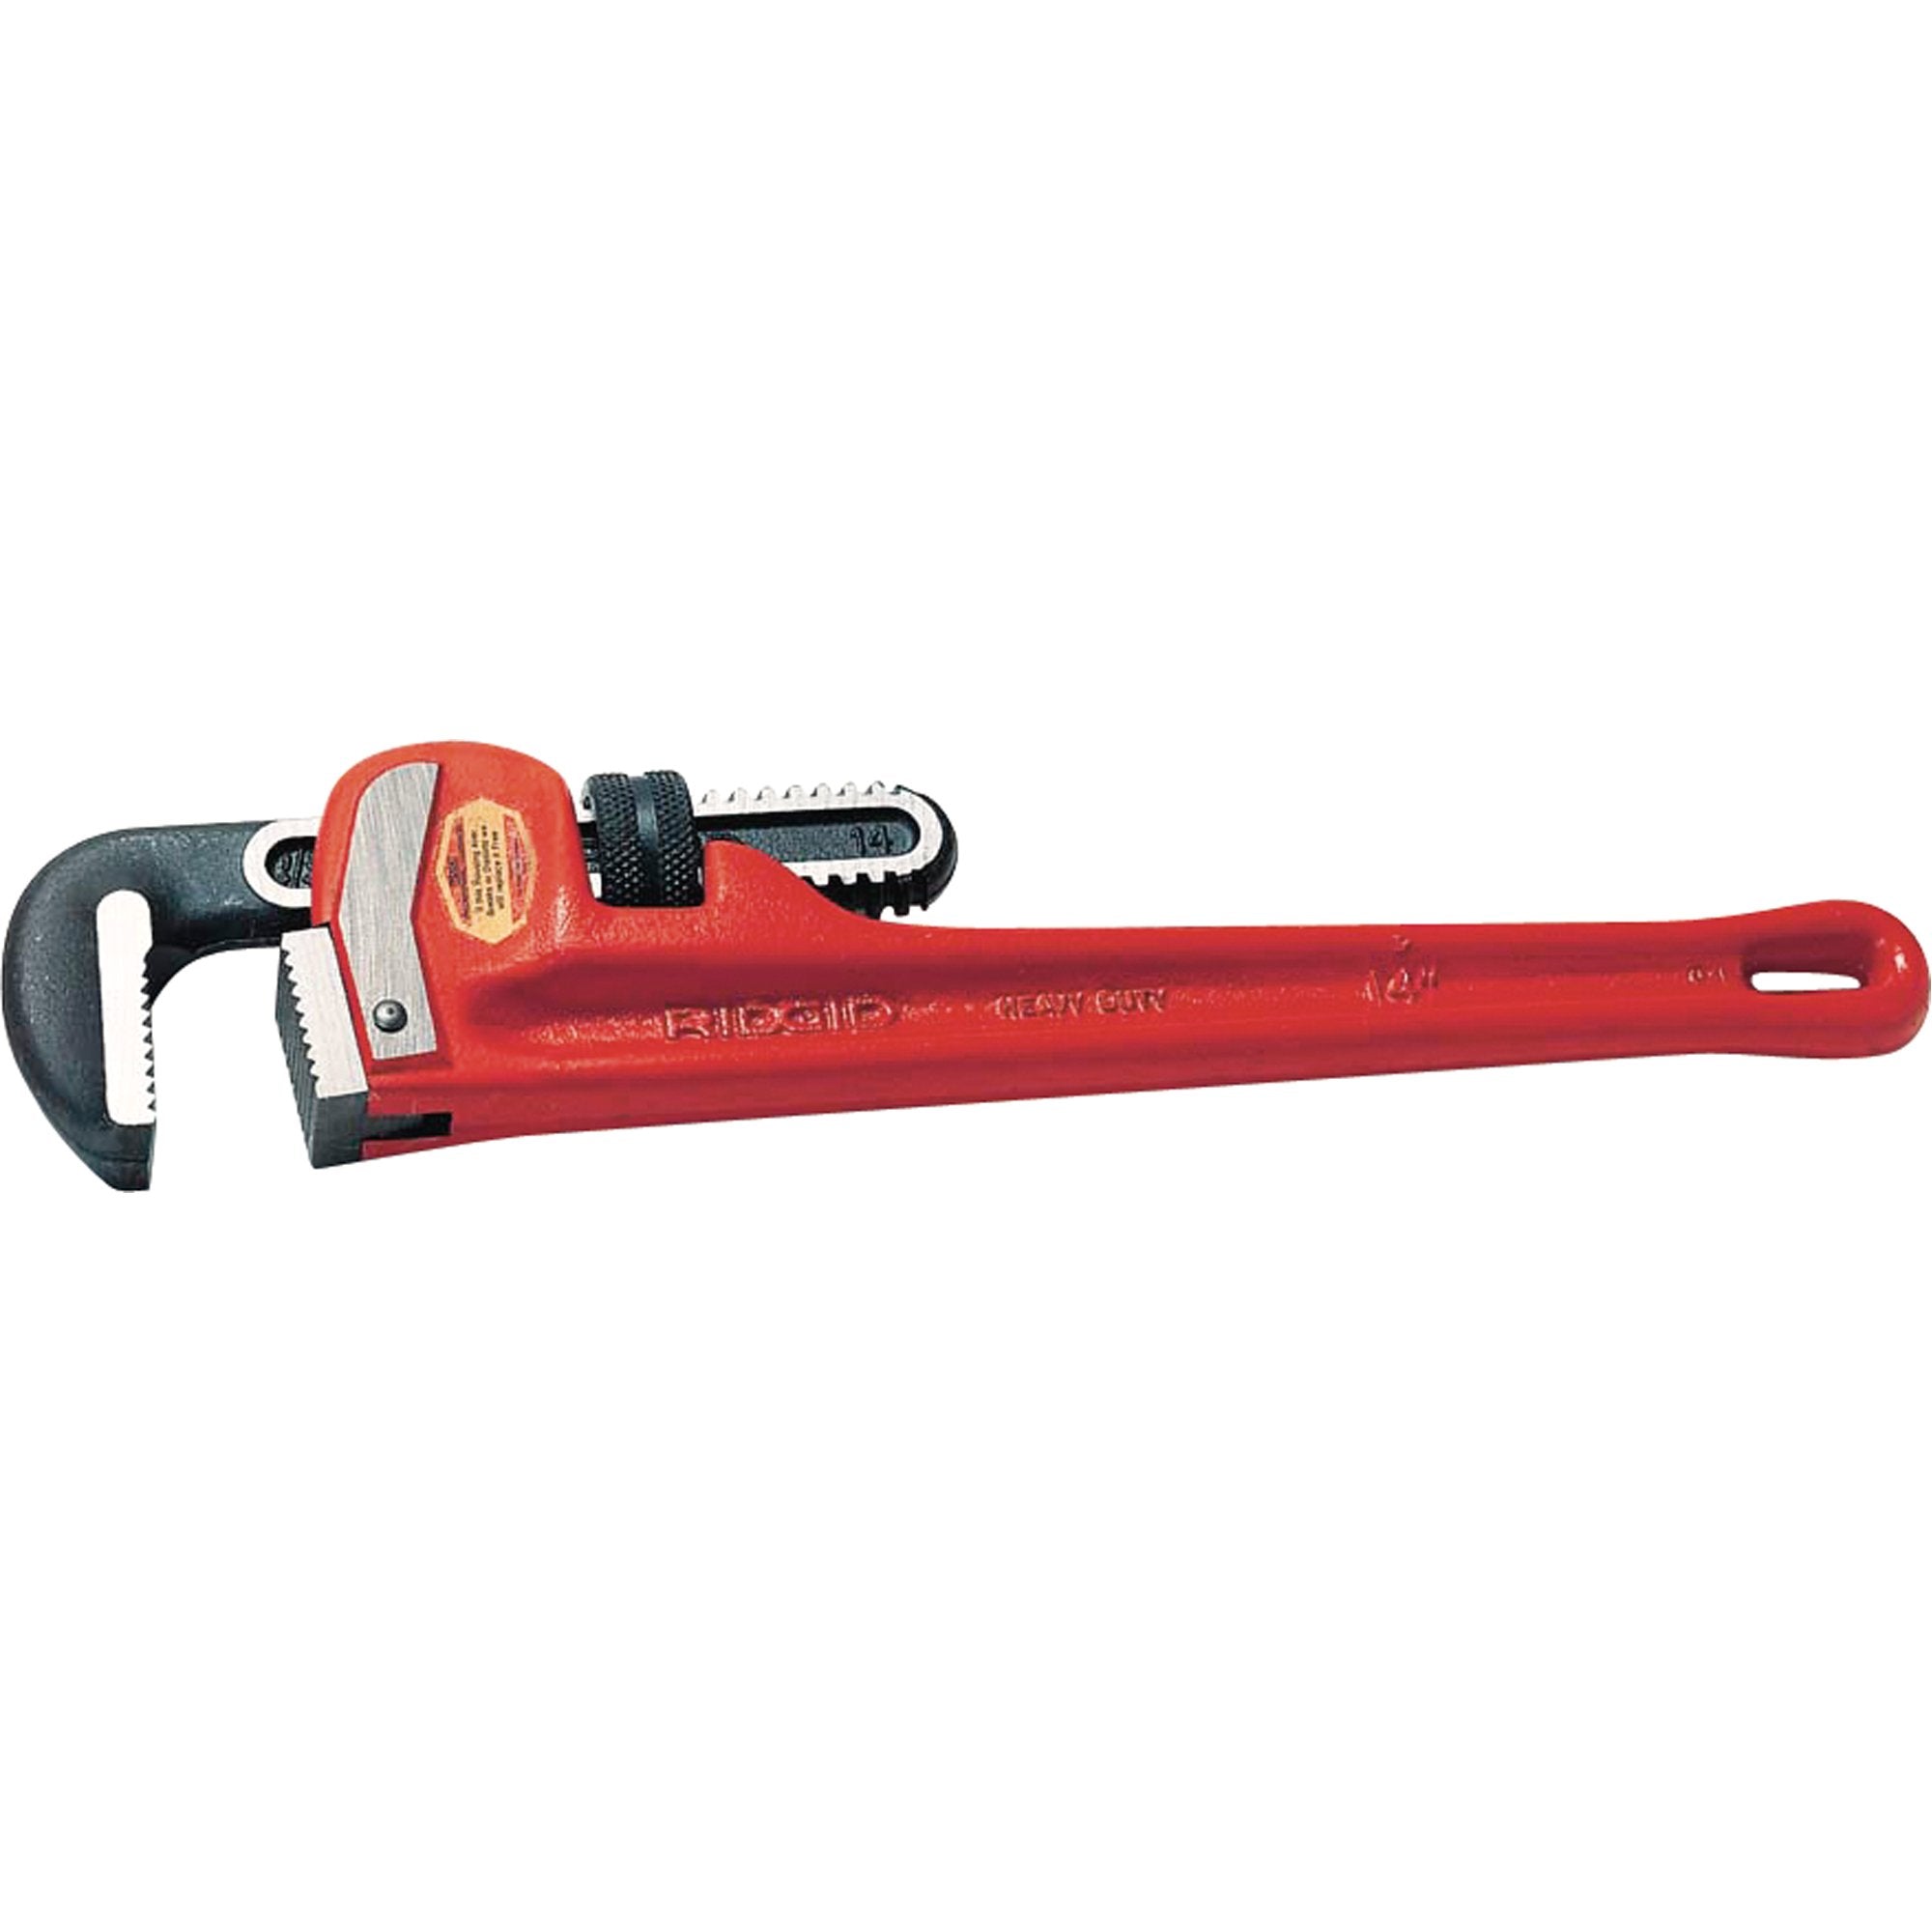 Ridgid Pipe Wrench 14 in - 31020